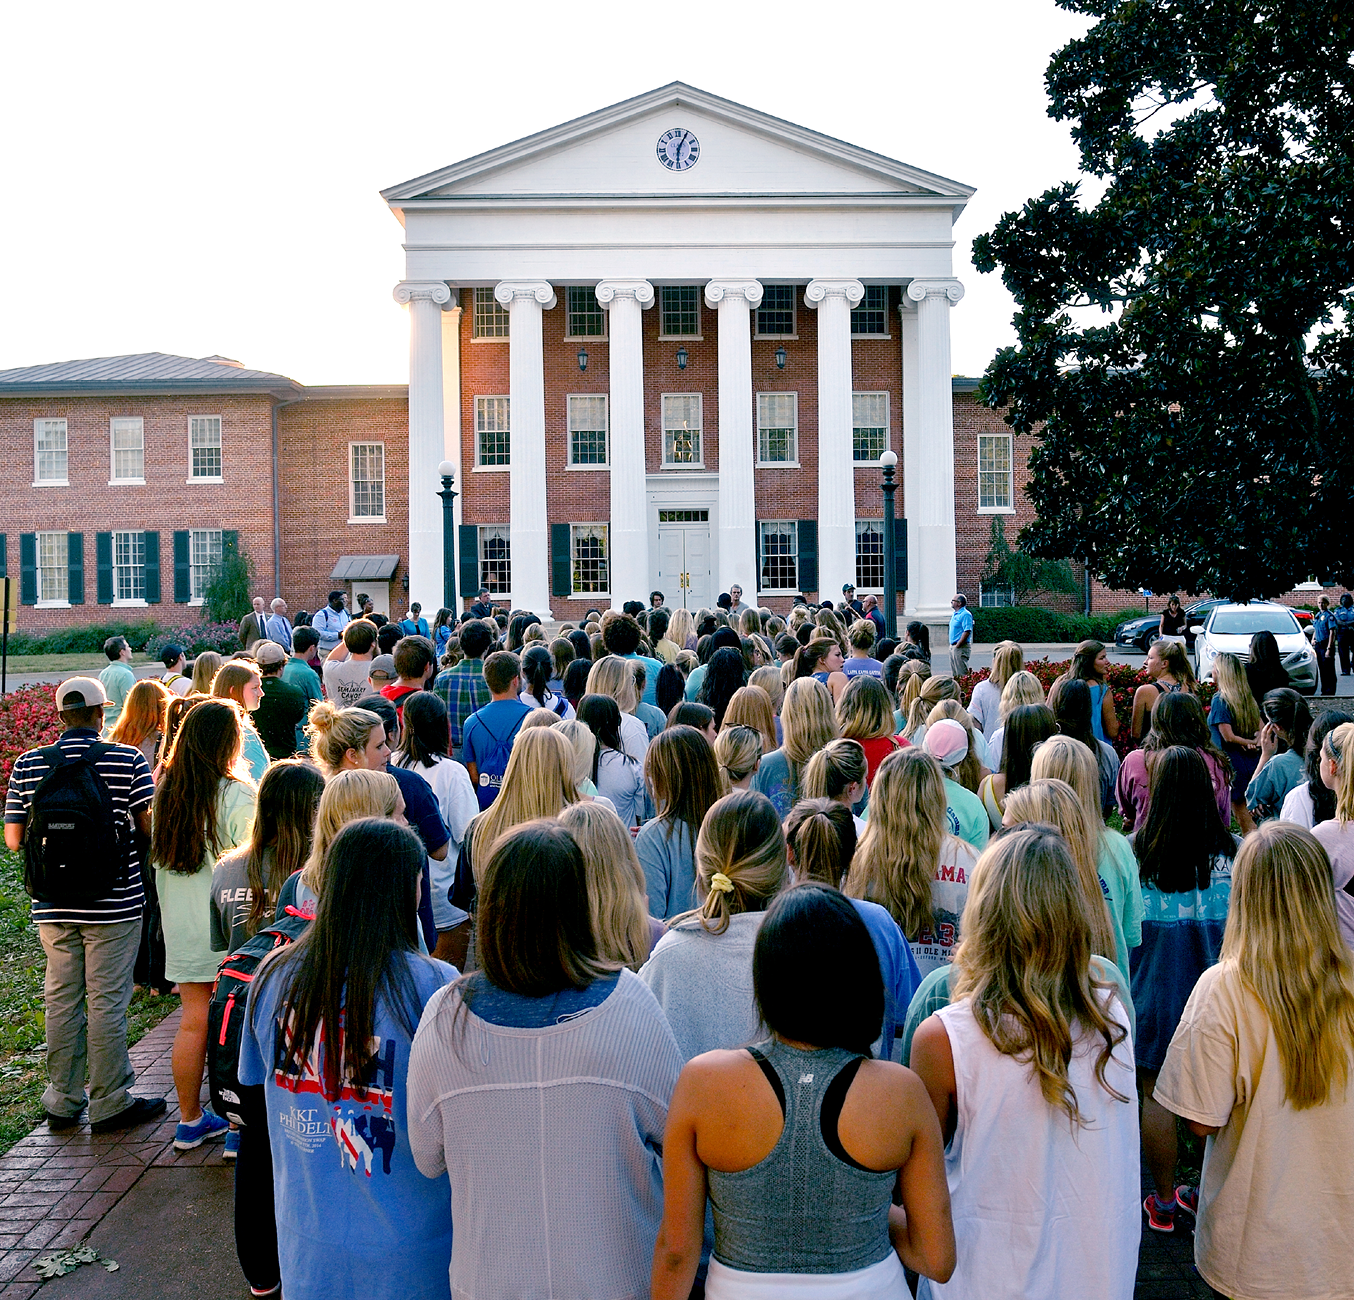 Ole Miss students gather for a candlelight vigil after one of the many active shooter situations in public places in the United States.